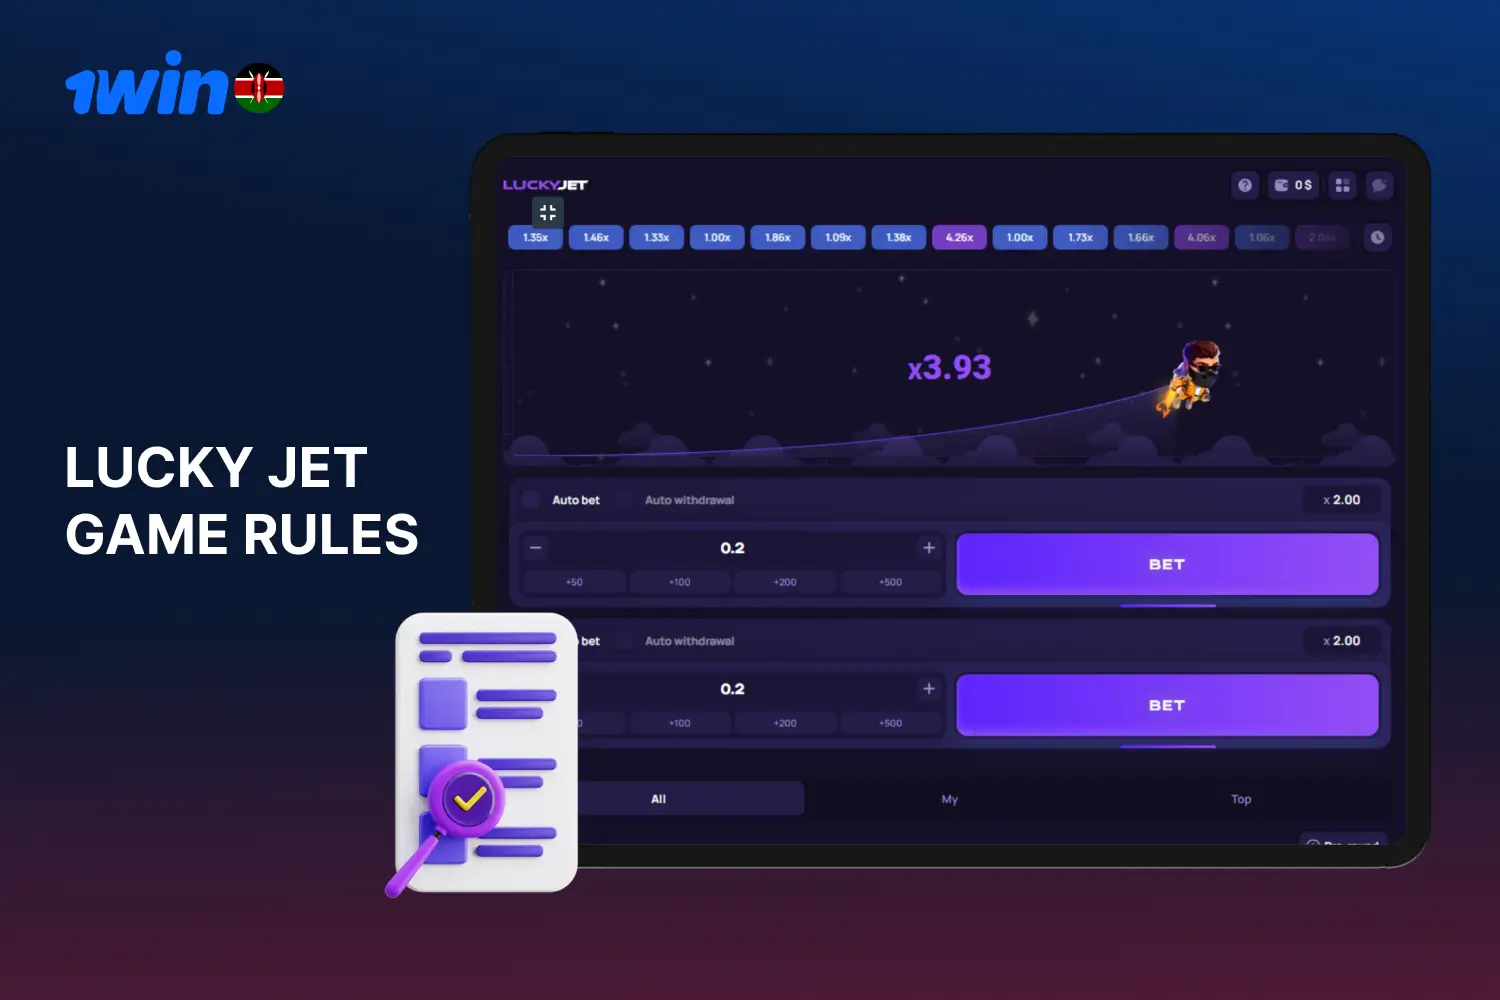 1win casino users should familiarize themselves with the rules of the game for a comfortable playing in Lucky Jet